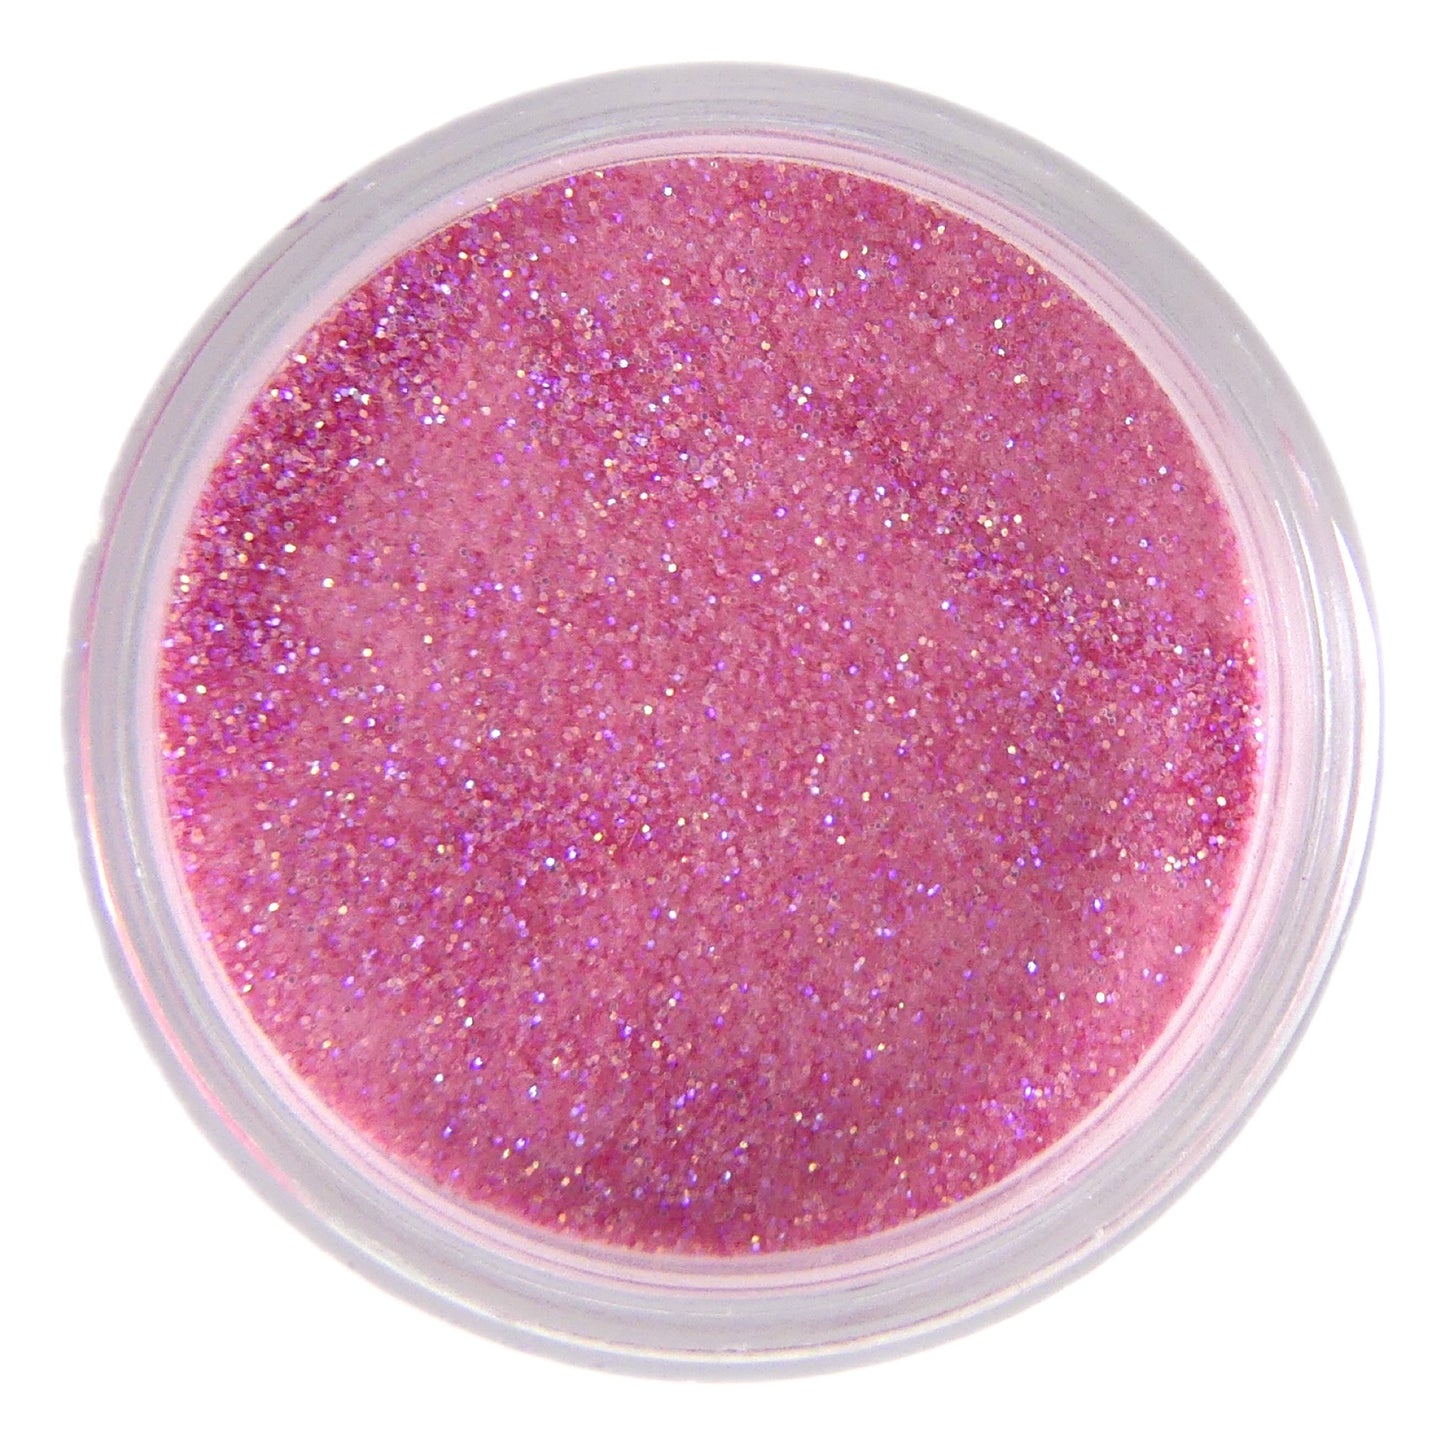 Baby Doll Pinks 4 piece 1/2oz Color Acrylic Powder Collection